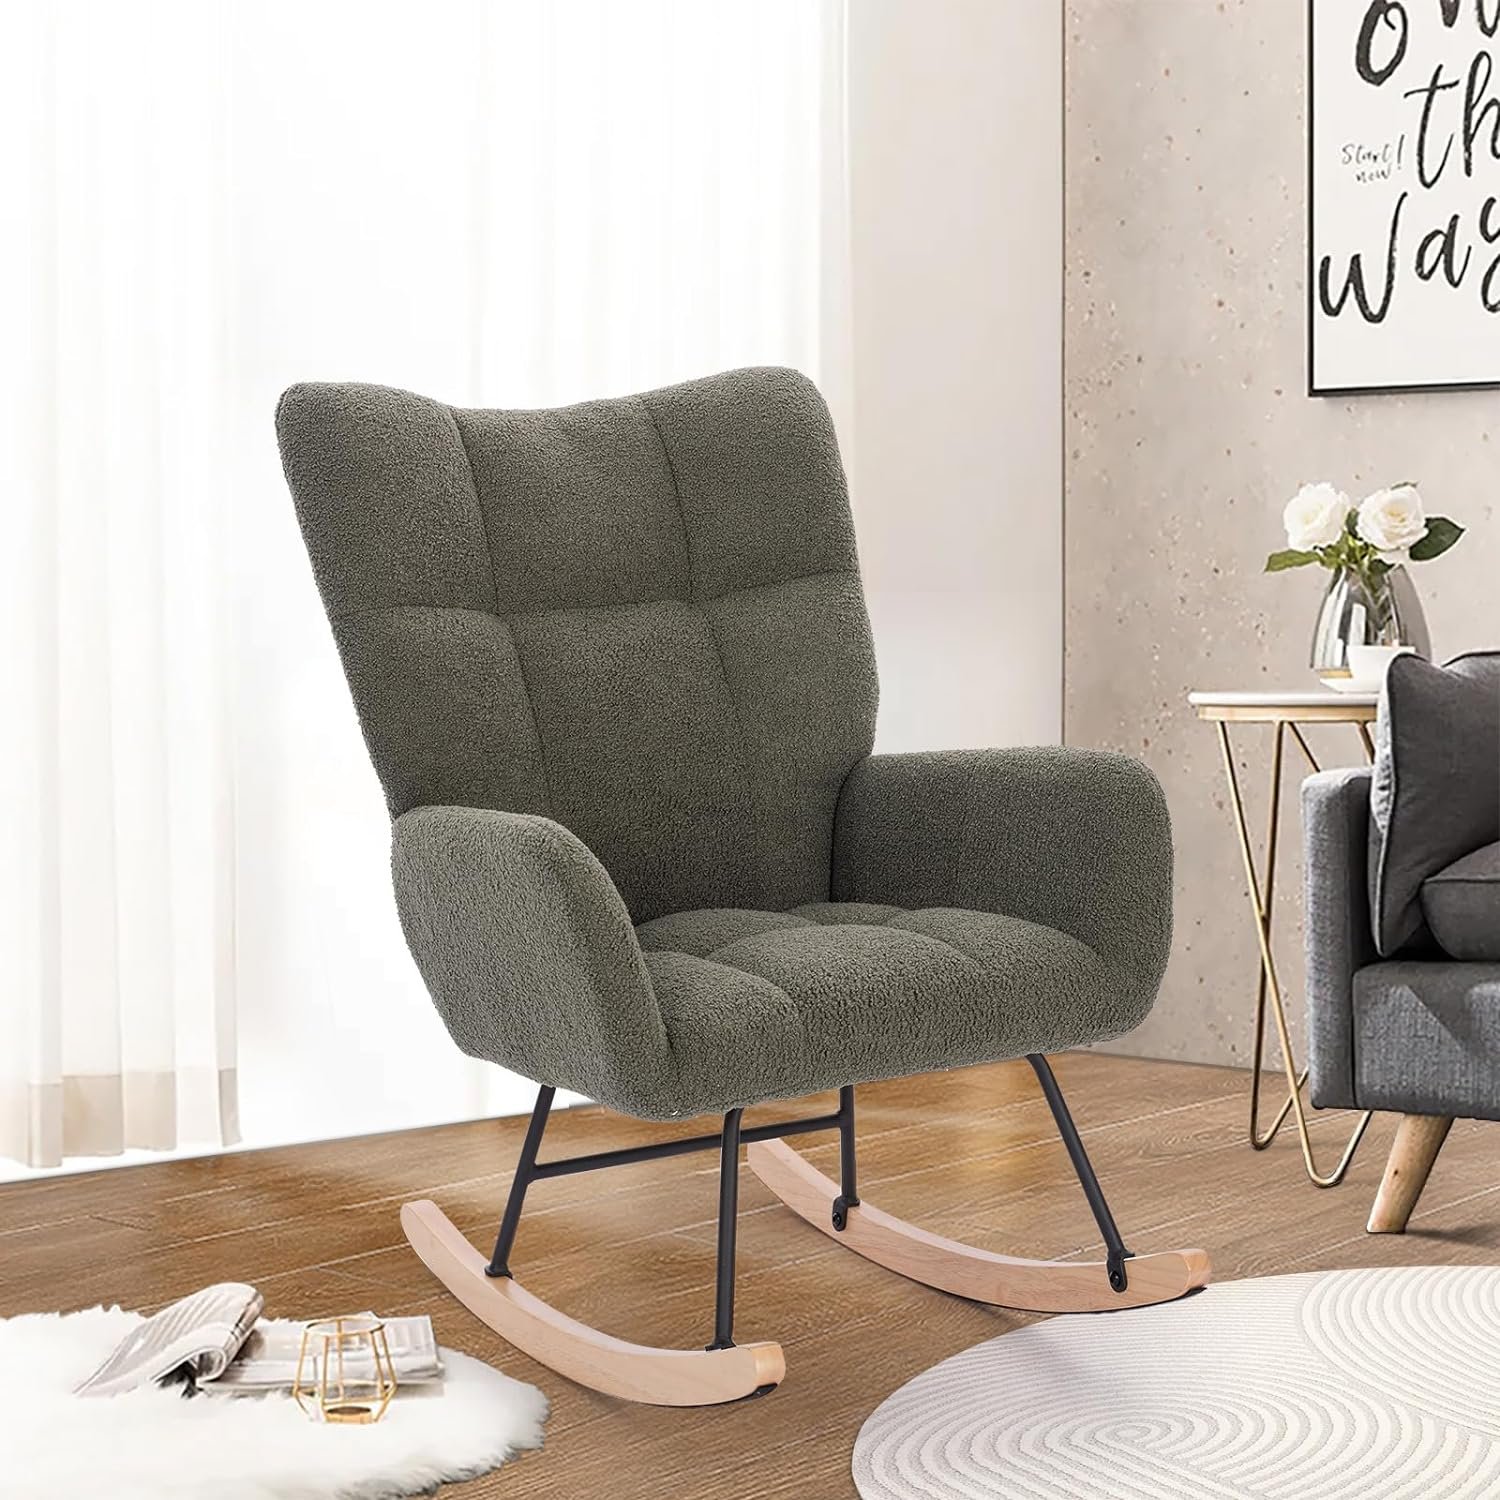 Green Rocking Chair Review